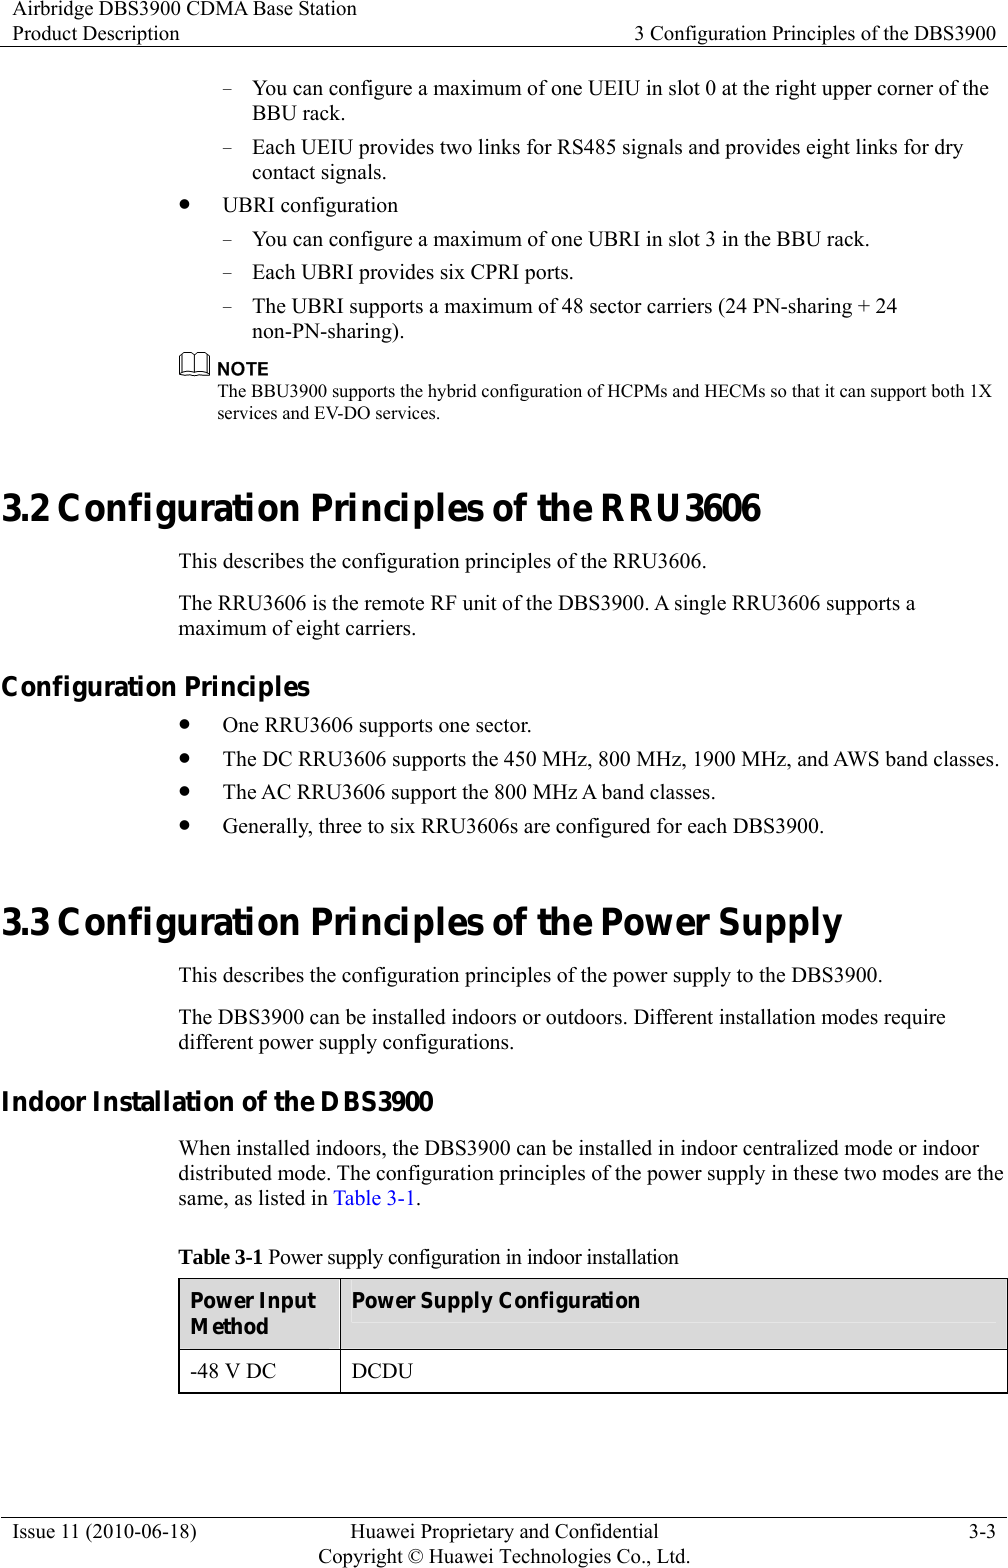 Airbridge DBS3900 CDMA Base Station Product Description  3 Configuration Principles of the DBS3900 Issue 11 (2010-06-18)  Huawei Proprietary and Confidential         Copyright © Huawei Technologies Co., Ltd.3-3 − You can configure a maximum of one UEIU in slot 0 at the right upper corner of the BBU rack.   − Each UEIU provides two links for RS485 signals and provides eight links for dry contact signals. z UBRI configuration − You can configure a maximum of one UBRI in slot 3 in the BBU rack. − Each UBRI provides six CPRI ports. − The UBRI supports a maximum of 48 sector carriers (24 PN-sharing + 24 non-PN-sharing).   The BBU3900 supports the hybrid configuration of HCPMs and HECMs so that it can support both 1X services and EV-DO services.   3.2 Configuration Principles of the RRU3606 This describes the configuration principles of the RRU3606. The RRU3606 is the remote RF unit of the DBS3900. A single RRU3606 supports a maximum of eight carriers. Configuration Principles z One RRU3606 supports one sector. z The DC RRU3606 supports the 450 MHz, 800 MHz, 1900 MHz, and AWS band classes. z The AC RRU3606 support the 800 MHz A band classes. z Generally, three to six RRU3606s are configured for each DBS3900. 3.3 Configuration Principles of the Power Supply This describes the configuration principles of the power supply to the DBS3900. The DBS3900 can be installed indoors or outdoors. Different installation modes require different power supply configurations. Indoor Installation of the DBS3900 When installed indoors, the DBS3900 can be installed in indoor centralized mode or indoor distributed mode. The configuration principles of the power supply in these two modes are the same, as listed in Table 3-1. Table 3-1 Power supply configuration in indoor installation Power Input Method  Power Supply Configuration -48 V DC  DCDU  